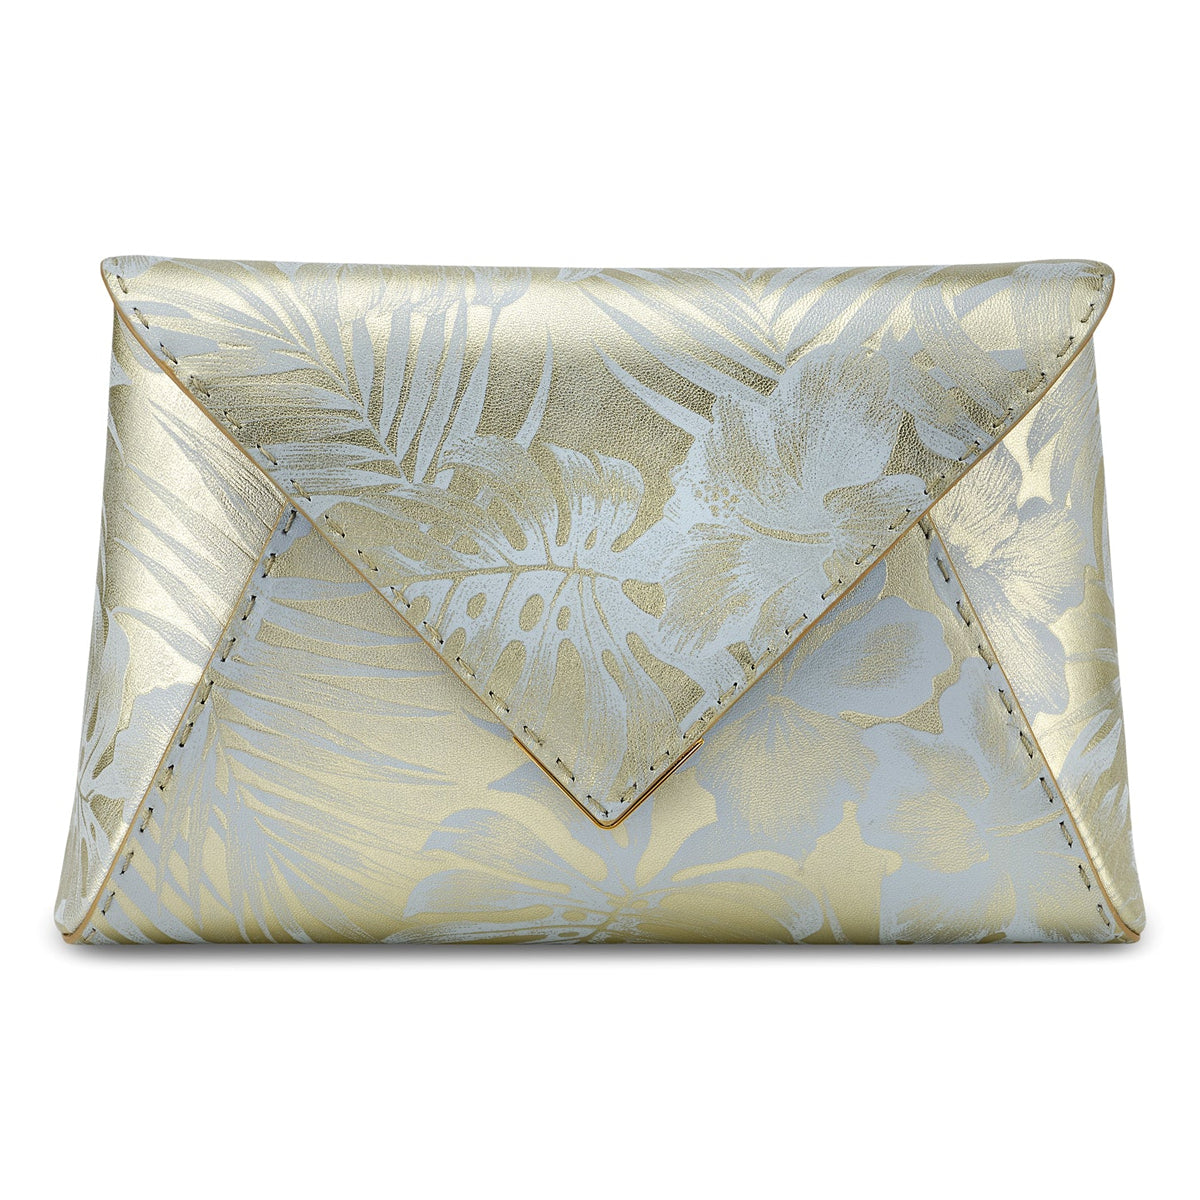 Lee Large Flower Clutch with Chain in Gold Shimmery Leather